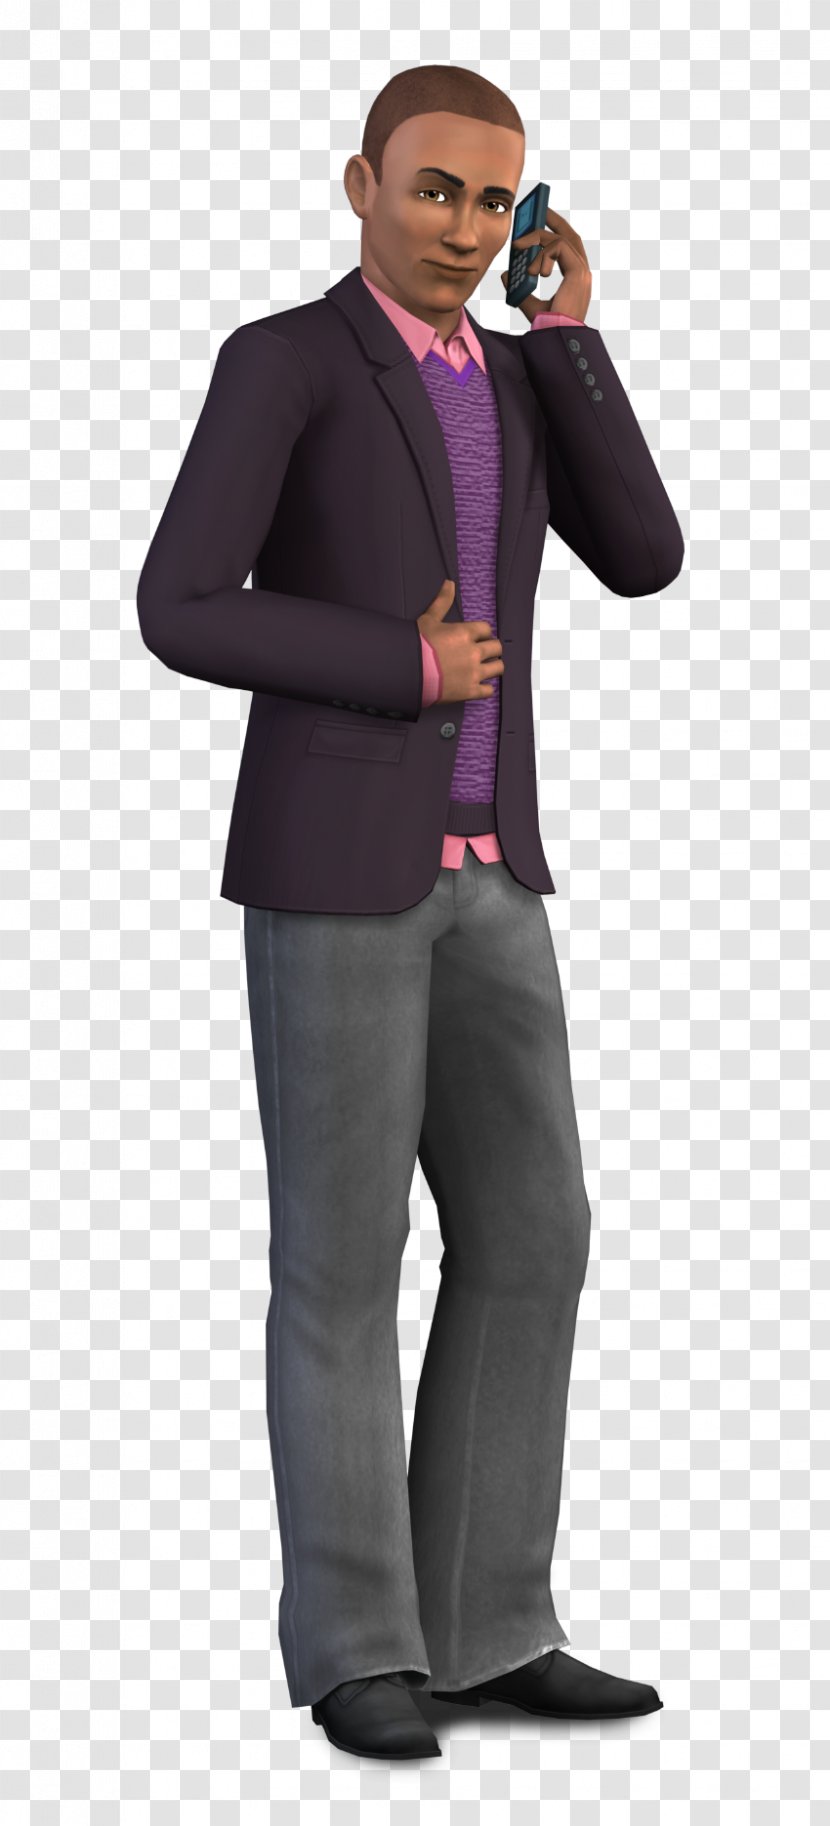 The Sims 3: Late Night 2: Pets 4 - Business - Bruno Transparent PNG